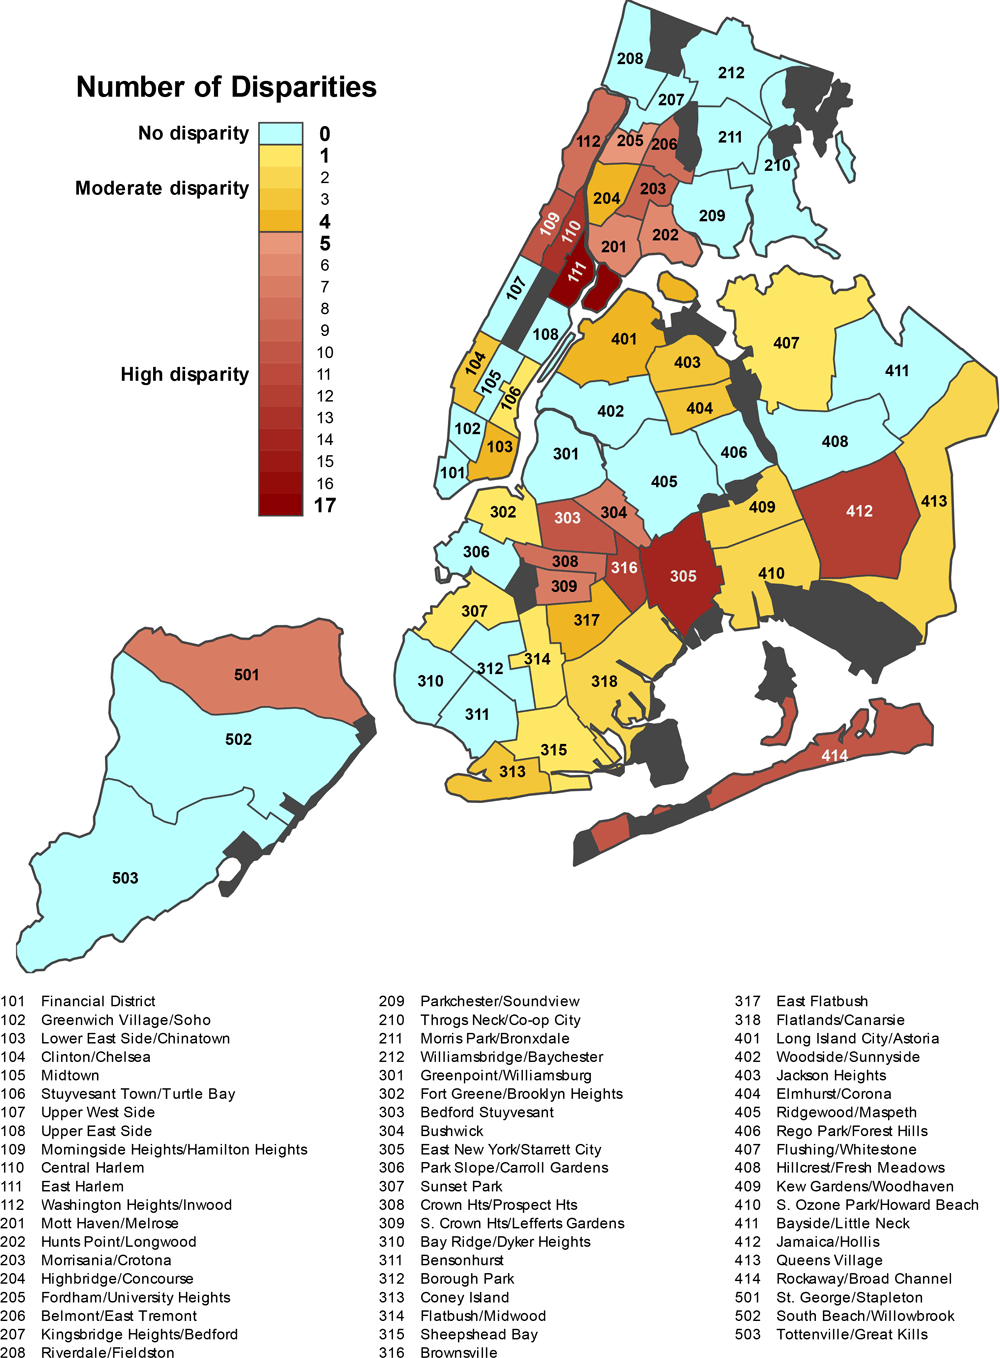 Map of New York City community districts by number of disparities relative to their borough. The map shows the 59 community districts and the disparity group of each district. Within the moderate and high disparity groups, darker colors indicate community districts with a greater number of health disparities.